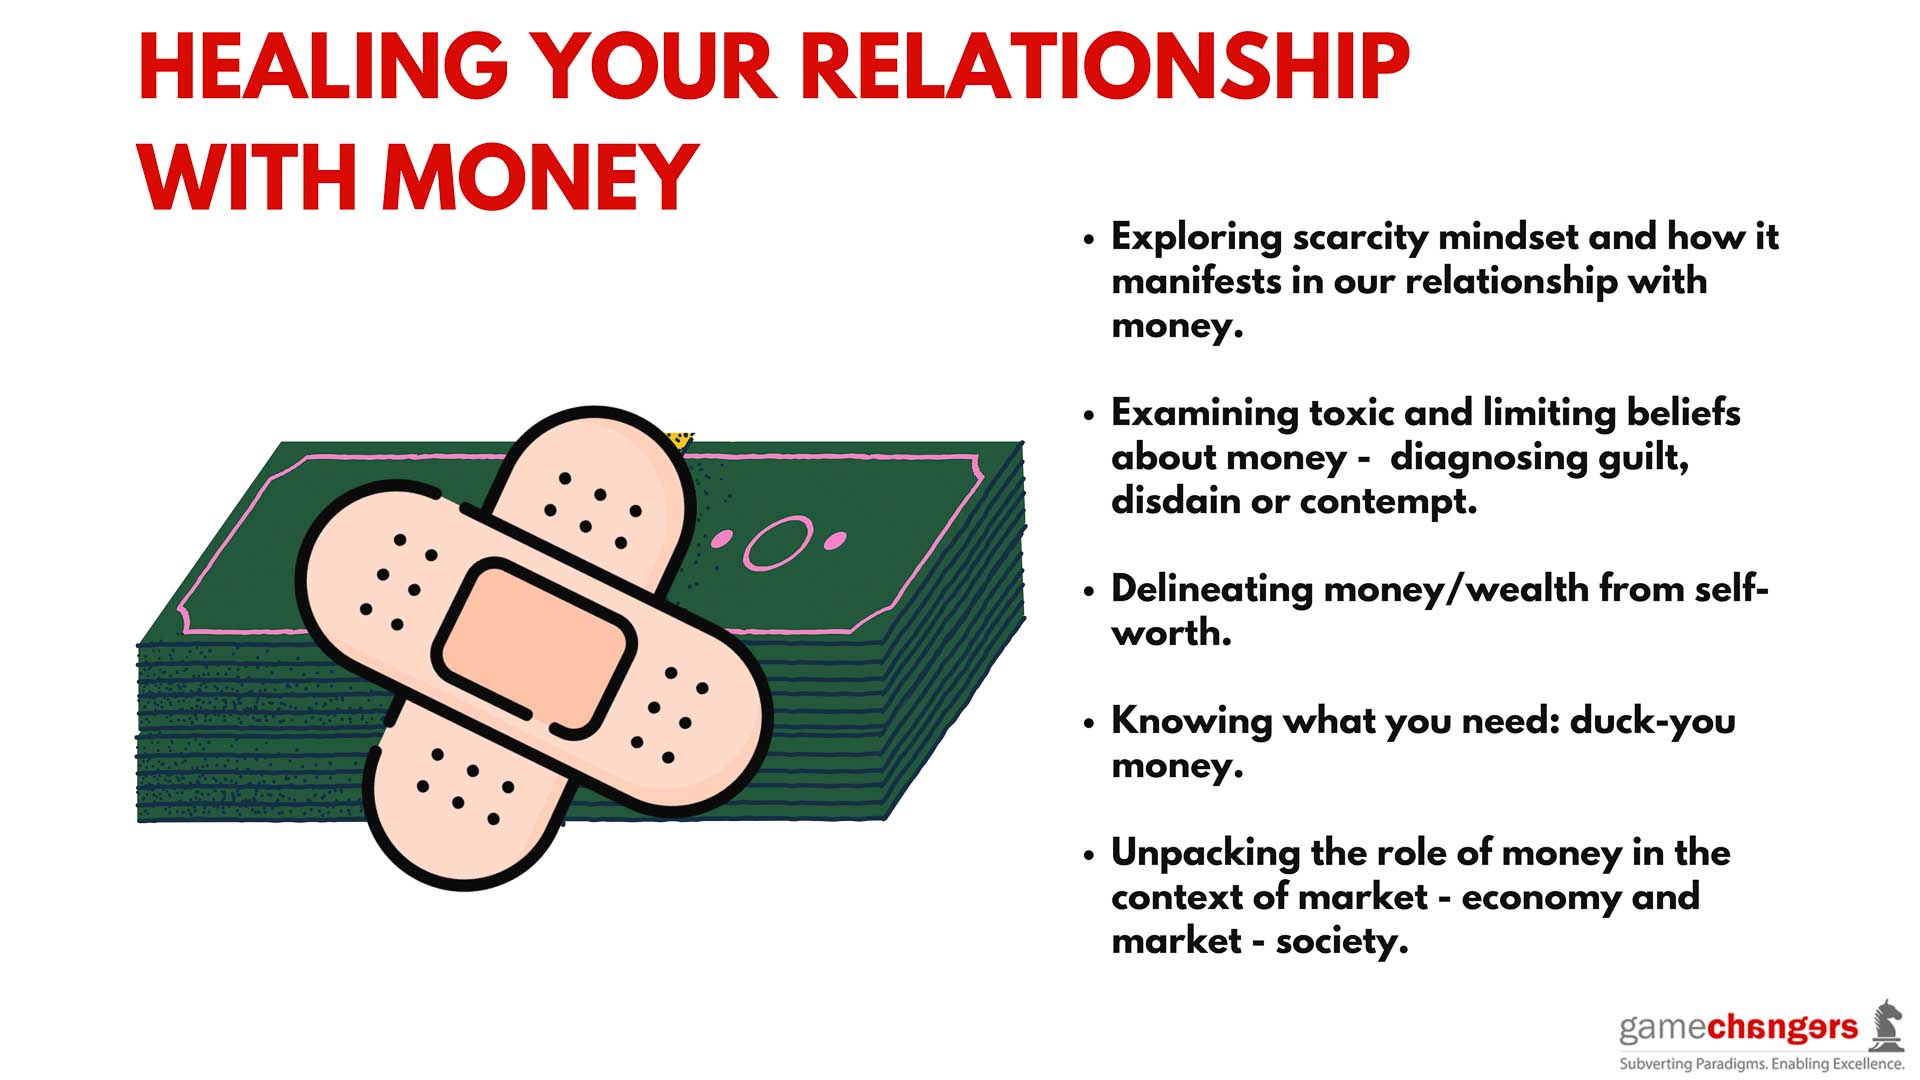 “eil-heal-your-relationship-with-money-14”